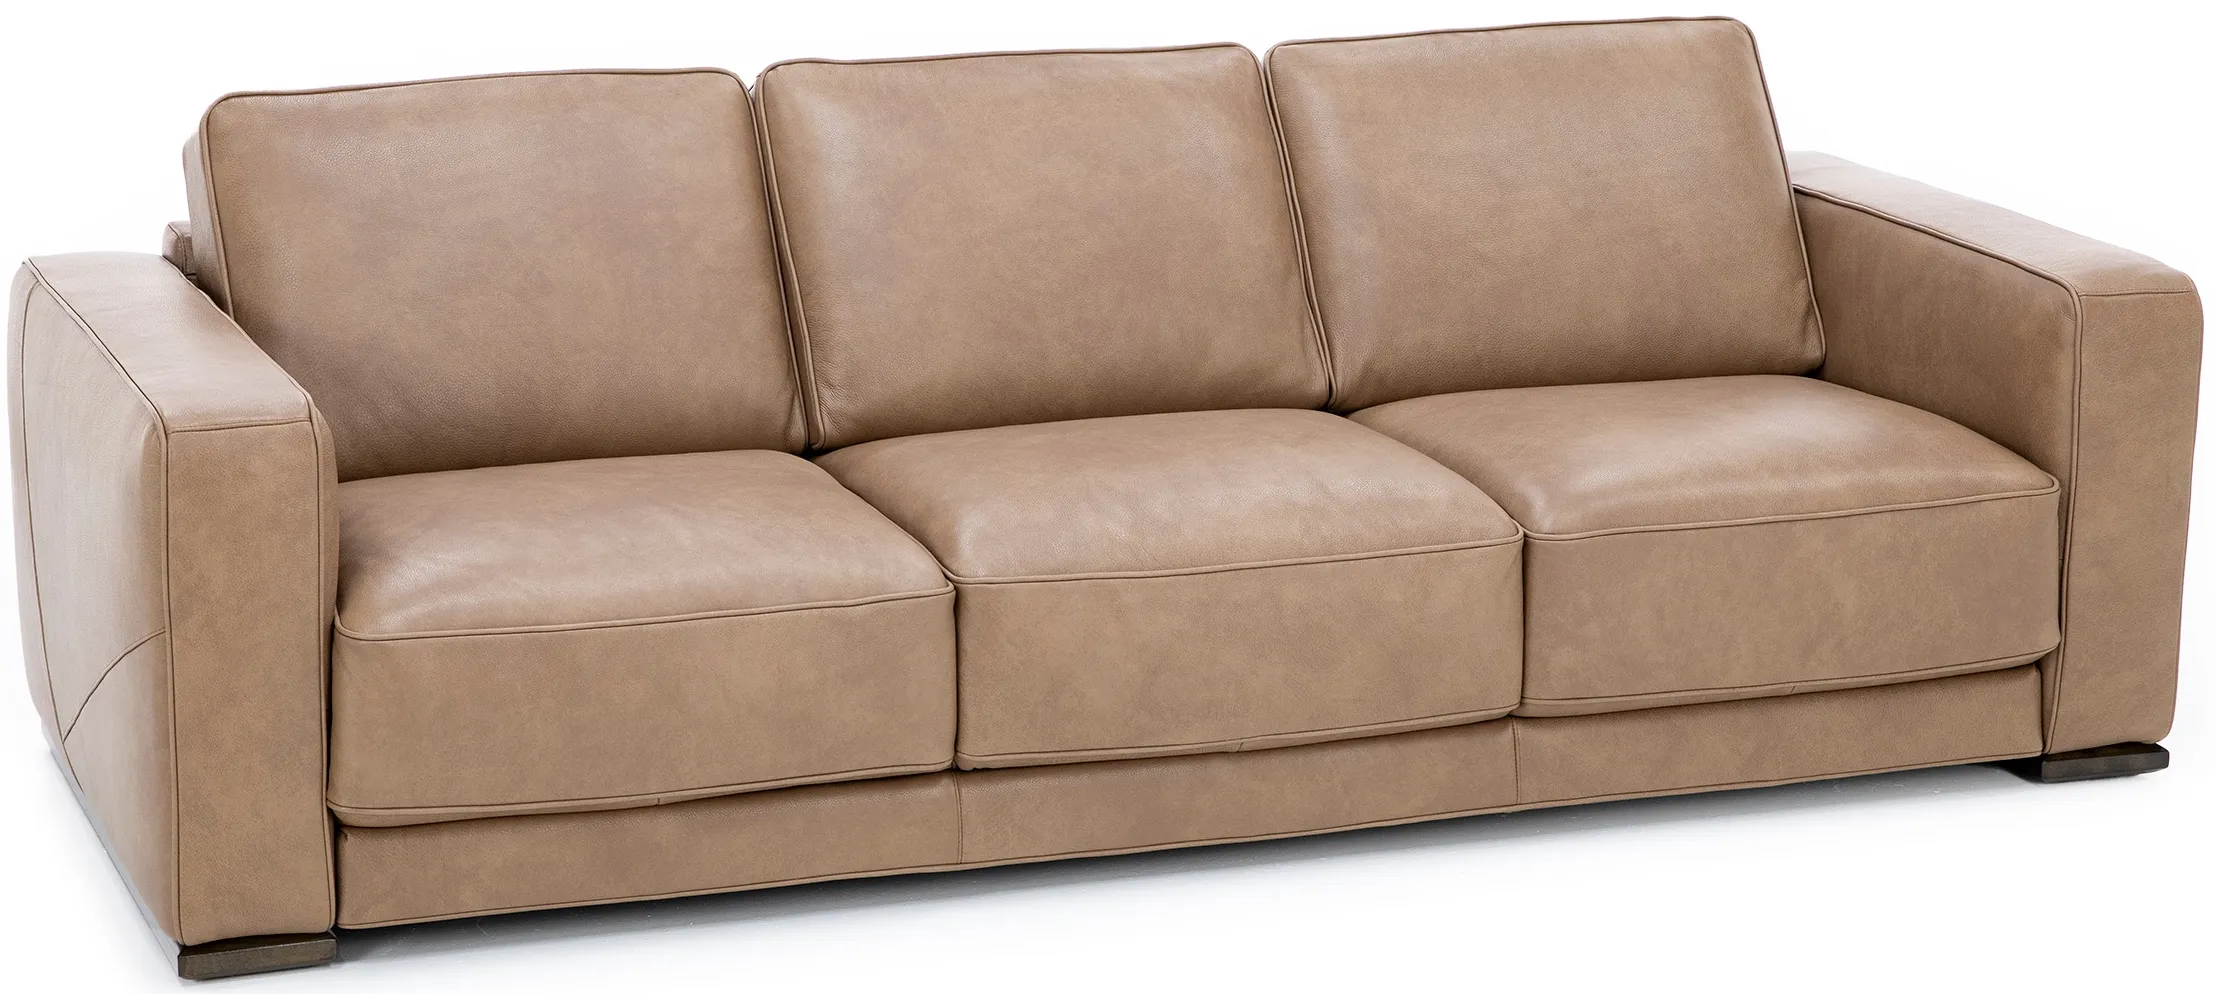 Bianca Leather Sofa in Brown